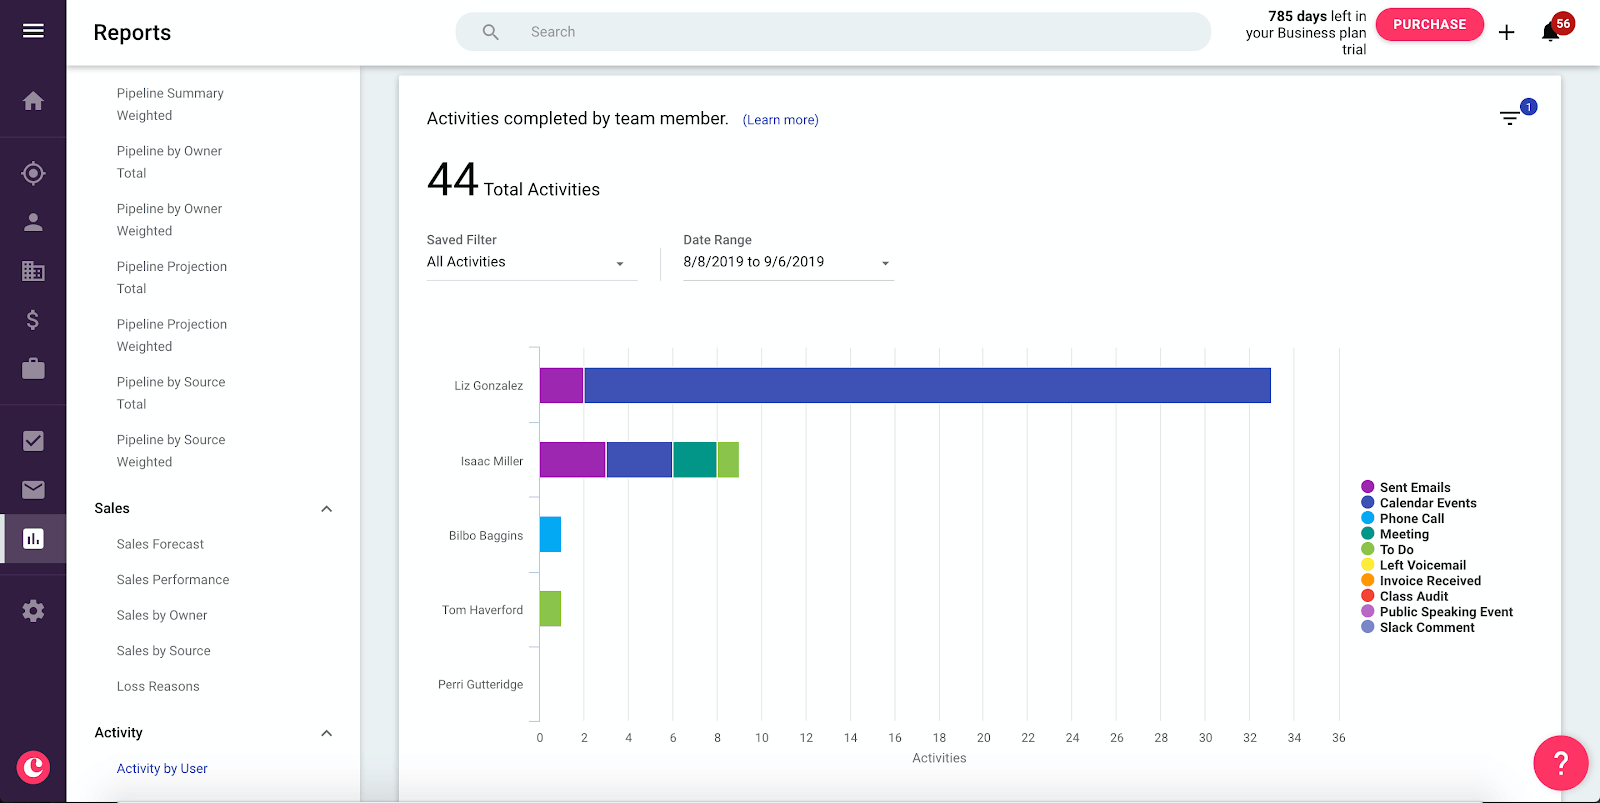 Activity by User in copper crm